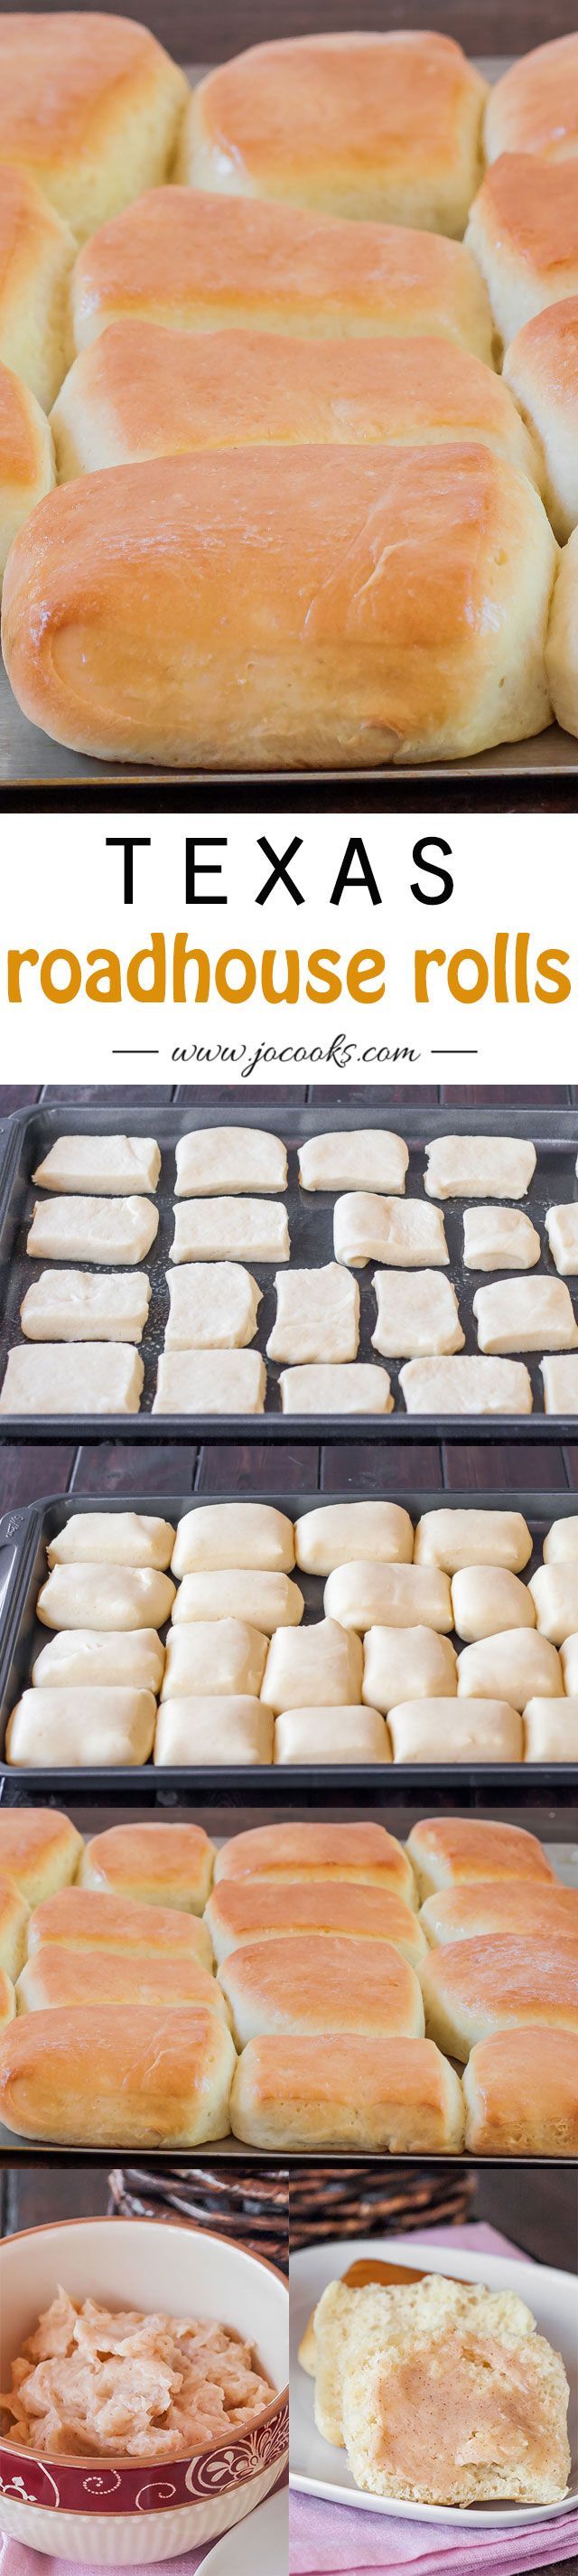 Texas Roadhouse Rolls – copycat recipe of the Texas roadhouse rolls, not only that but the best rolls you will ever eat.